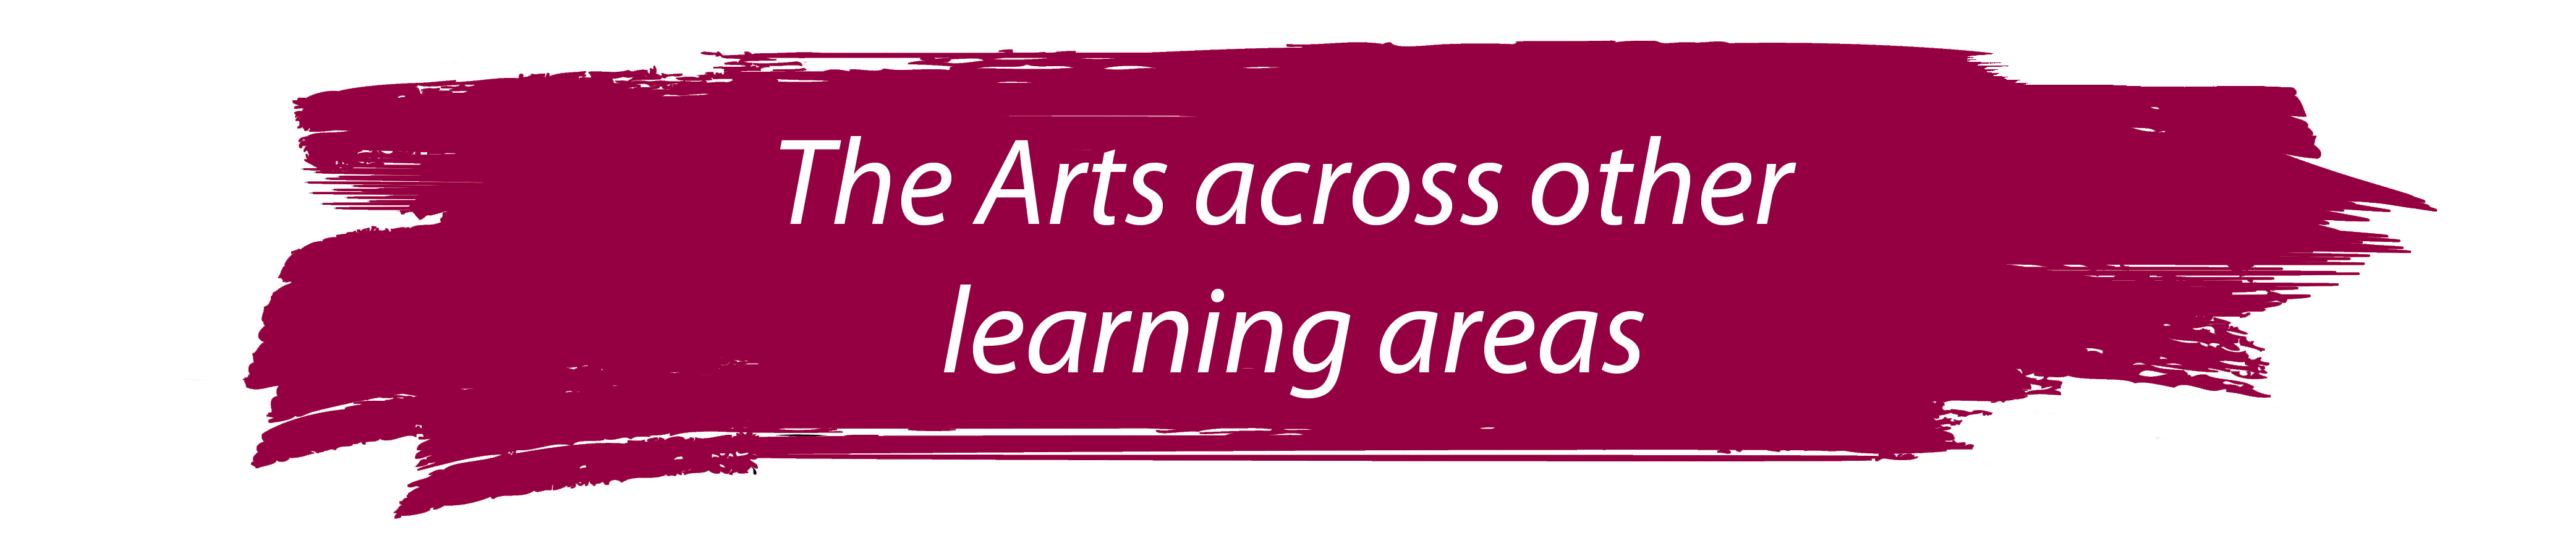 The Arts across other learning areas